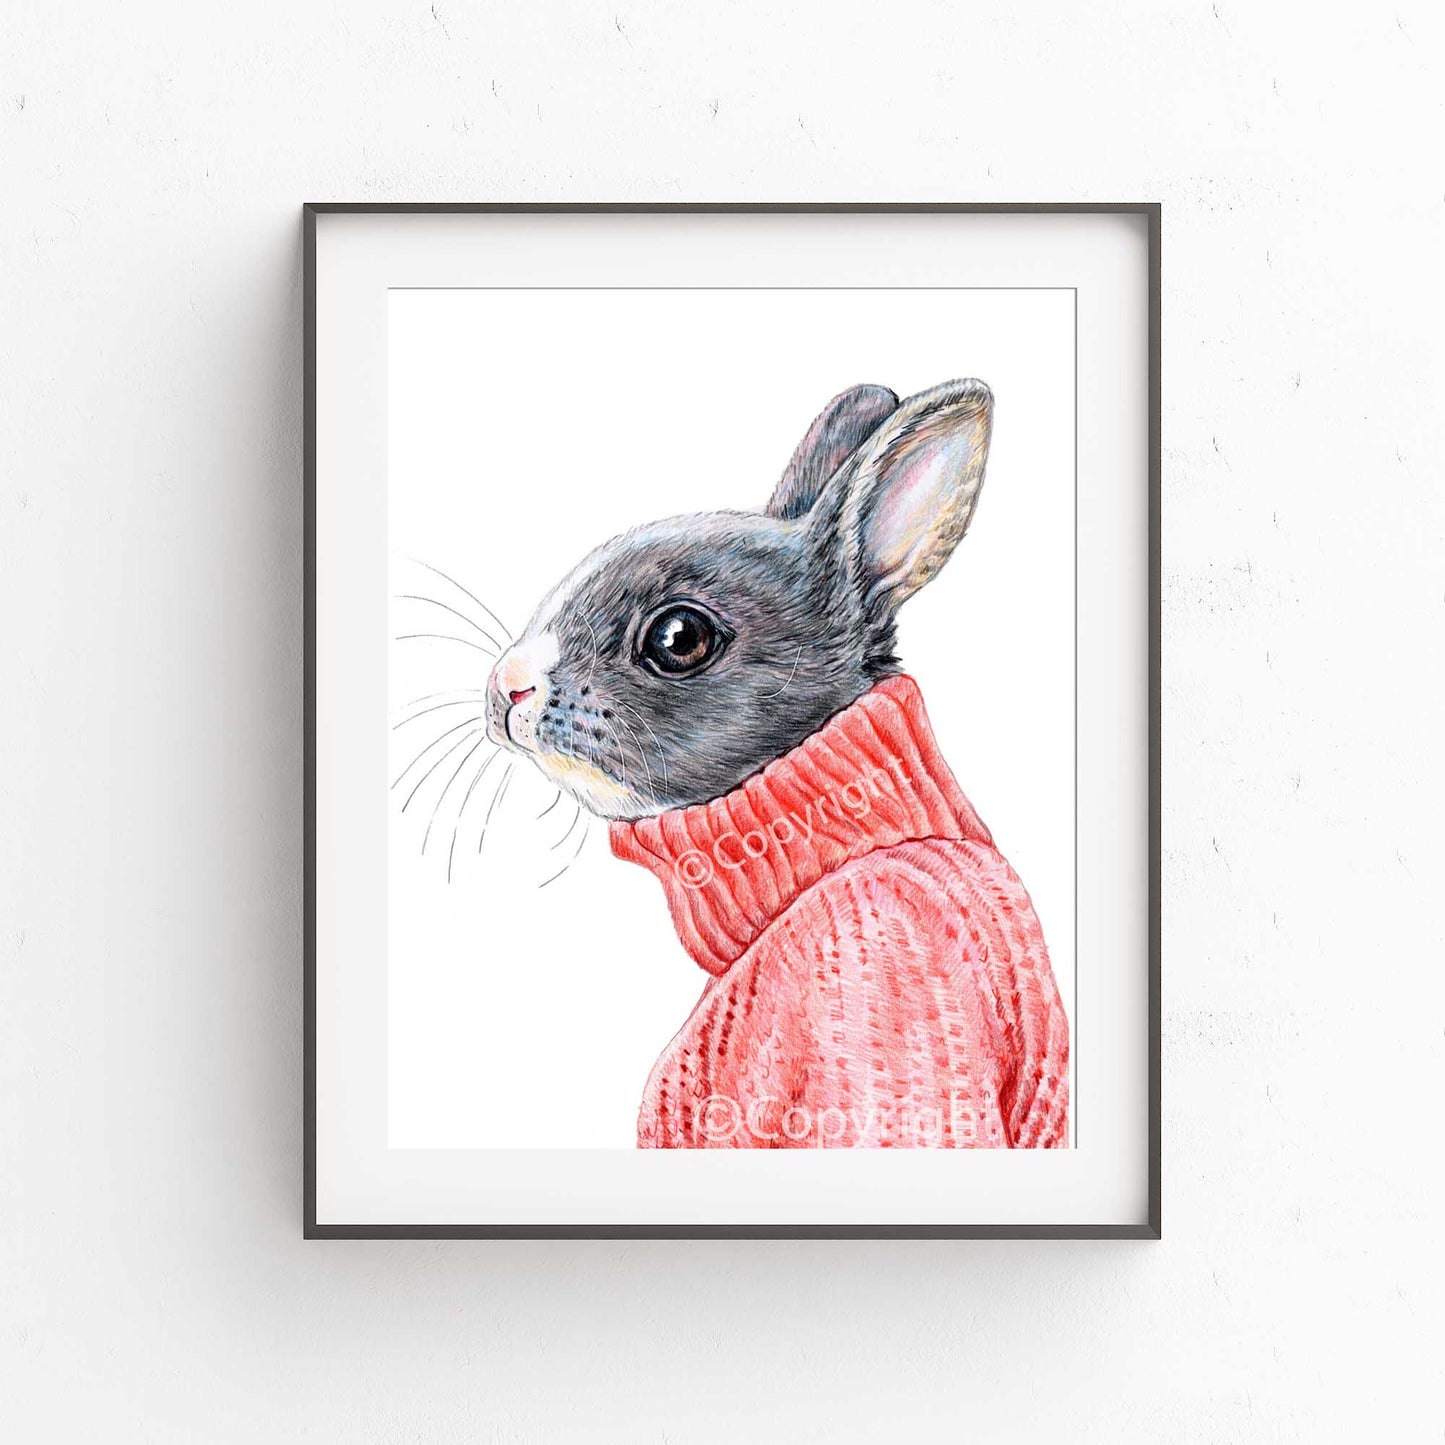 Coloured pencil drawing of a bunny rabbit wearing a red turtleneck sweater. Art by Deidre Wicks